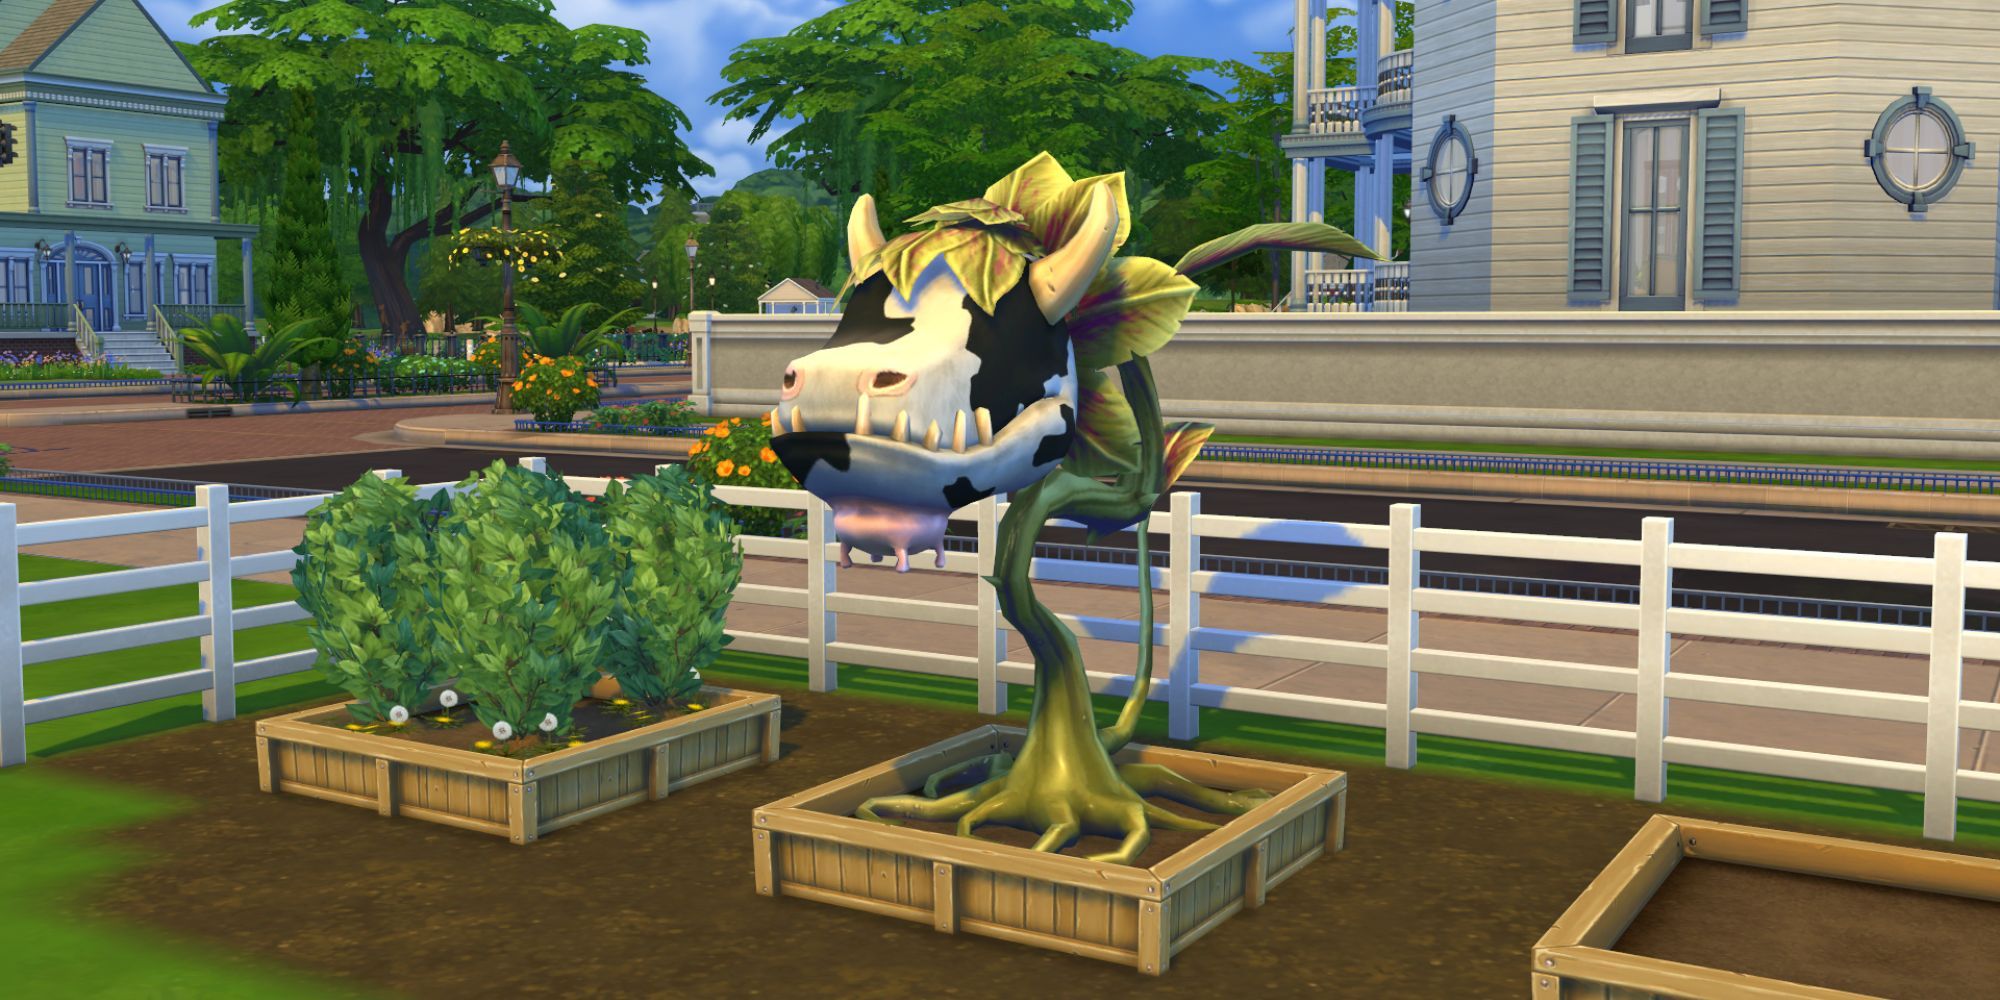 The Sims 4 Cow Plant growing in a back garden